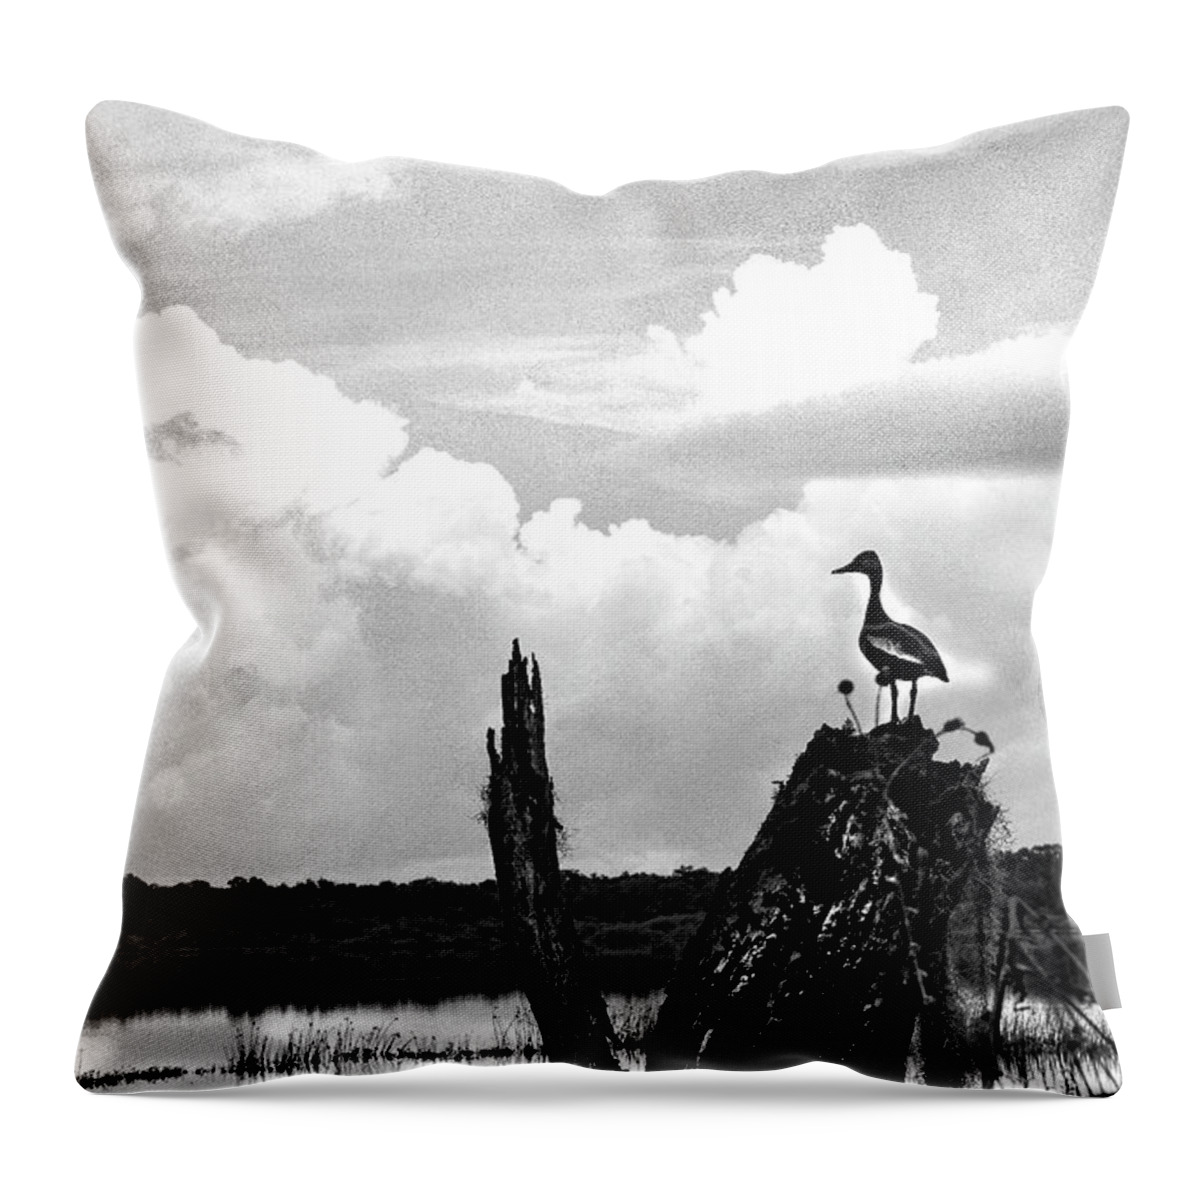 Clouds Throw Pillow featuring the photograph Gathering Storm by Rick Redman